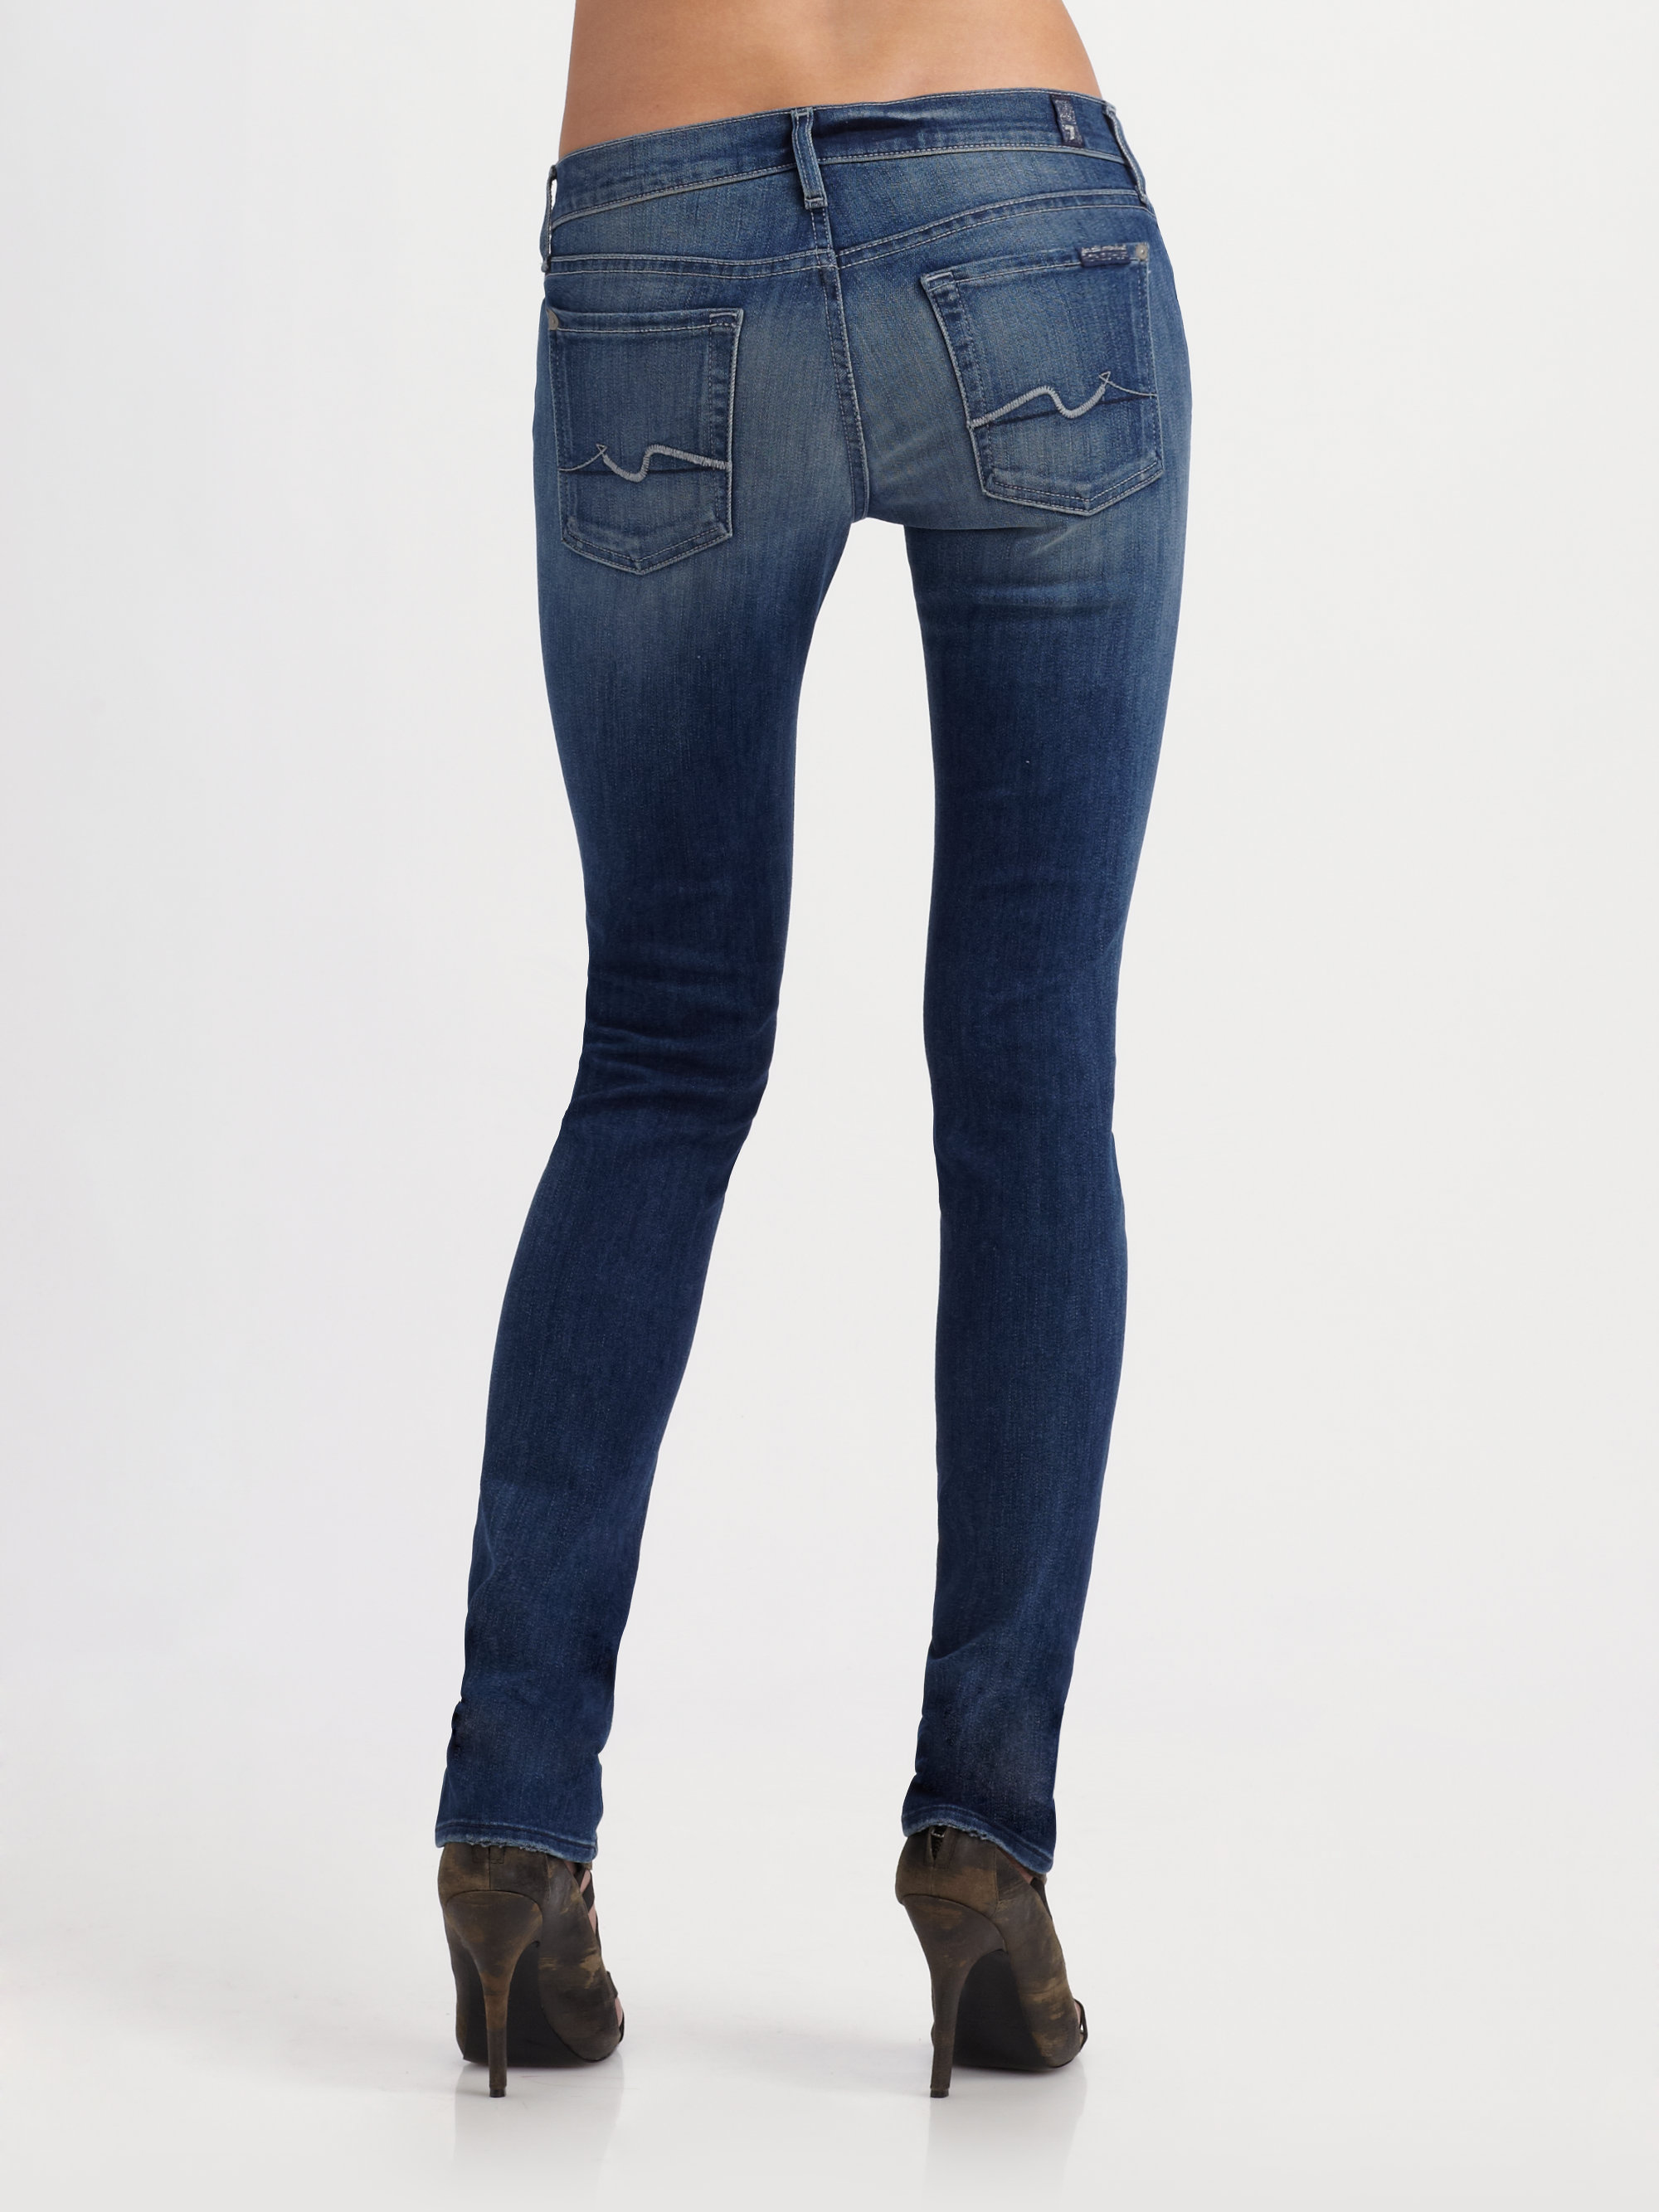 7 For All Mankind Womens Roxanne Ankle Jean Free Fast Delivery Make